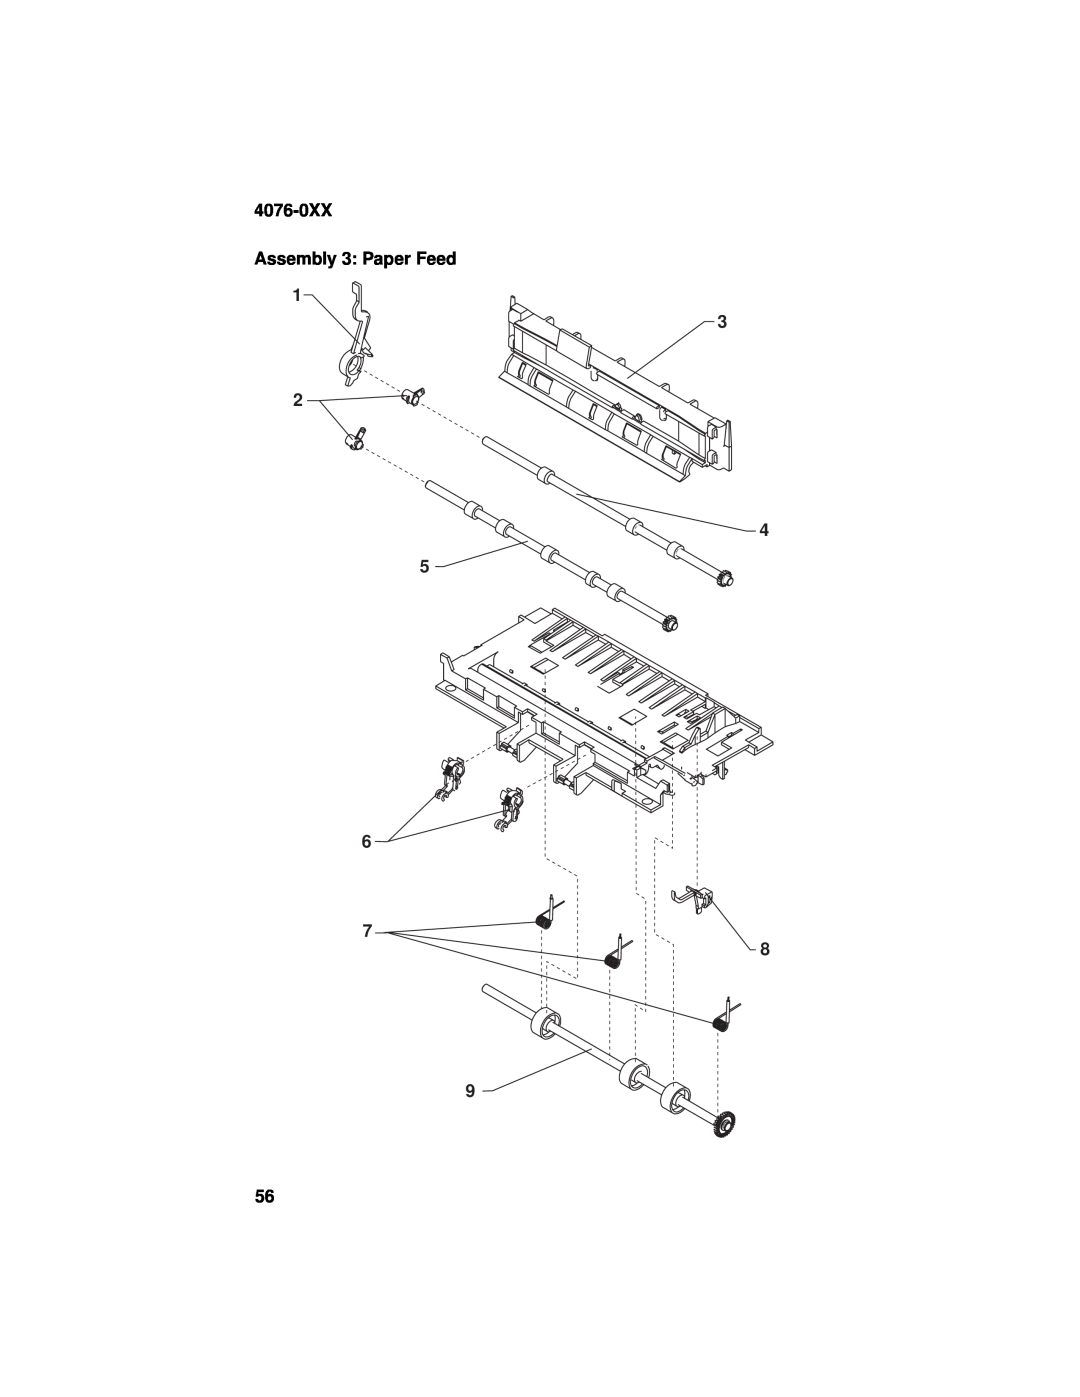 Lexmark manual 4076-0XX Assembly 3: Paper Feed 1 3 2 4 5 6 7 8 9 